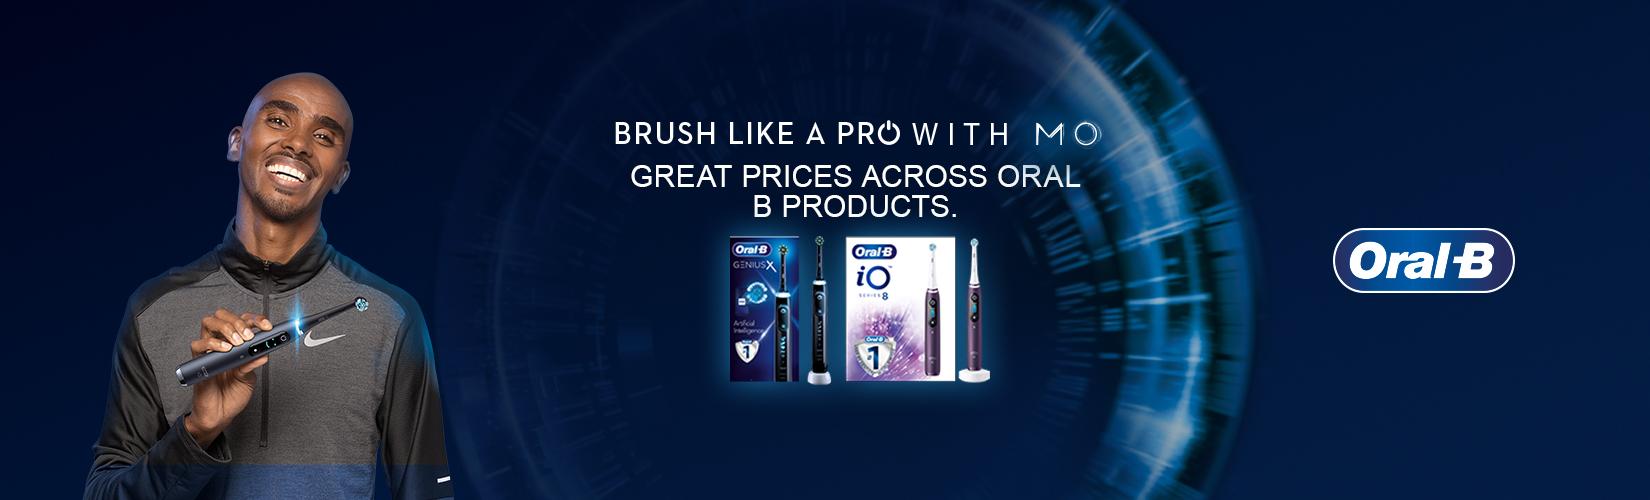 Brush like a pro with MO. Great prices across Oral B products.